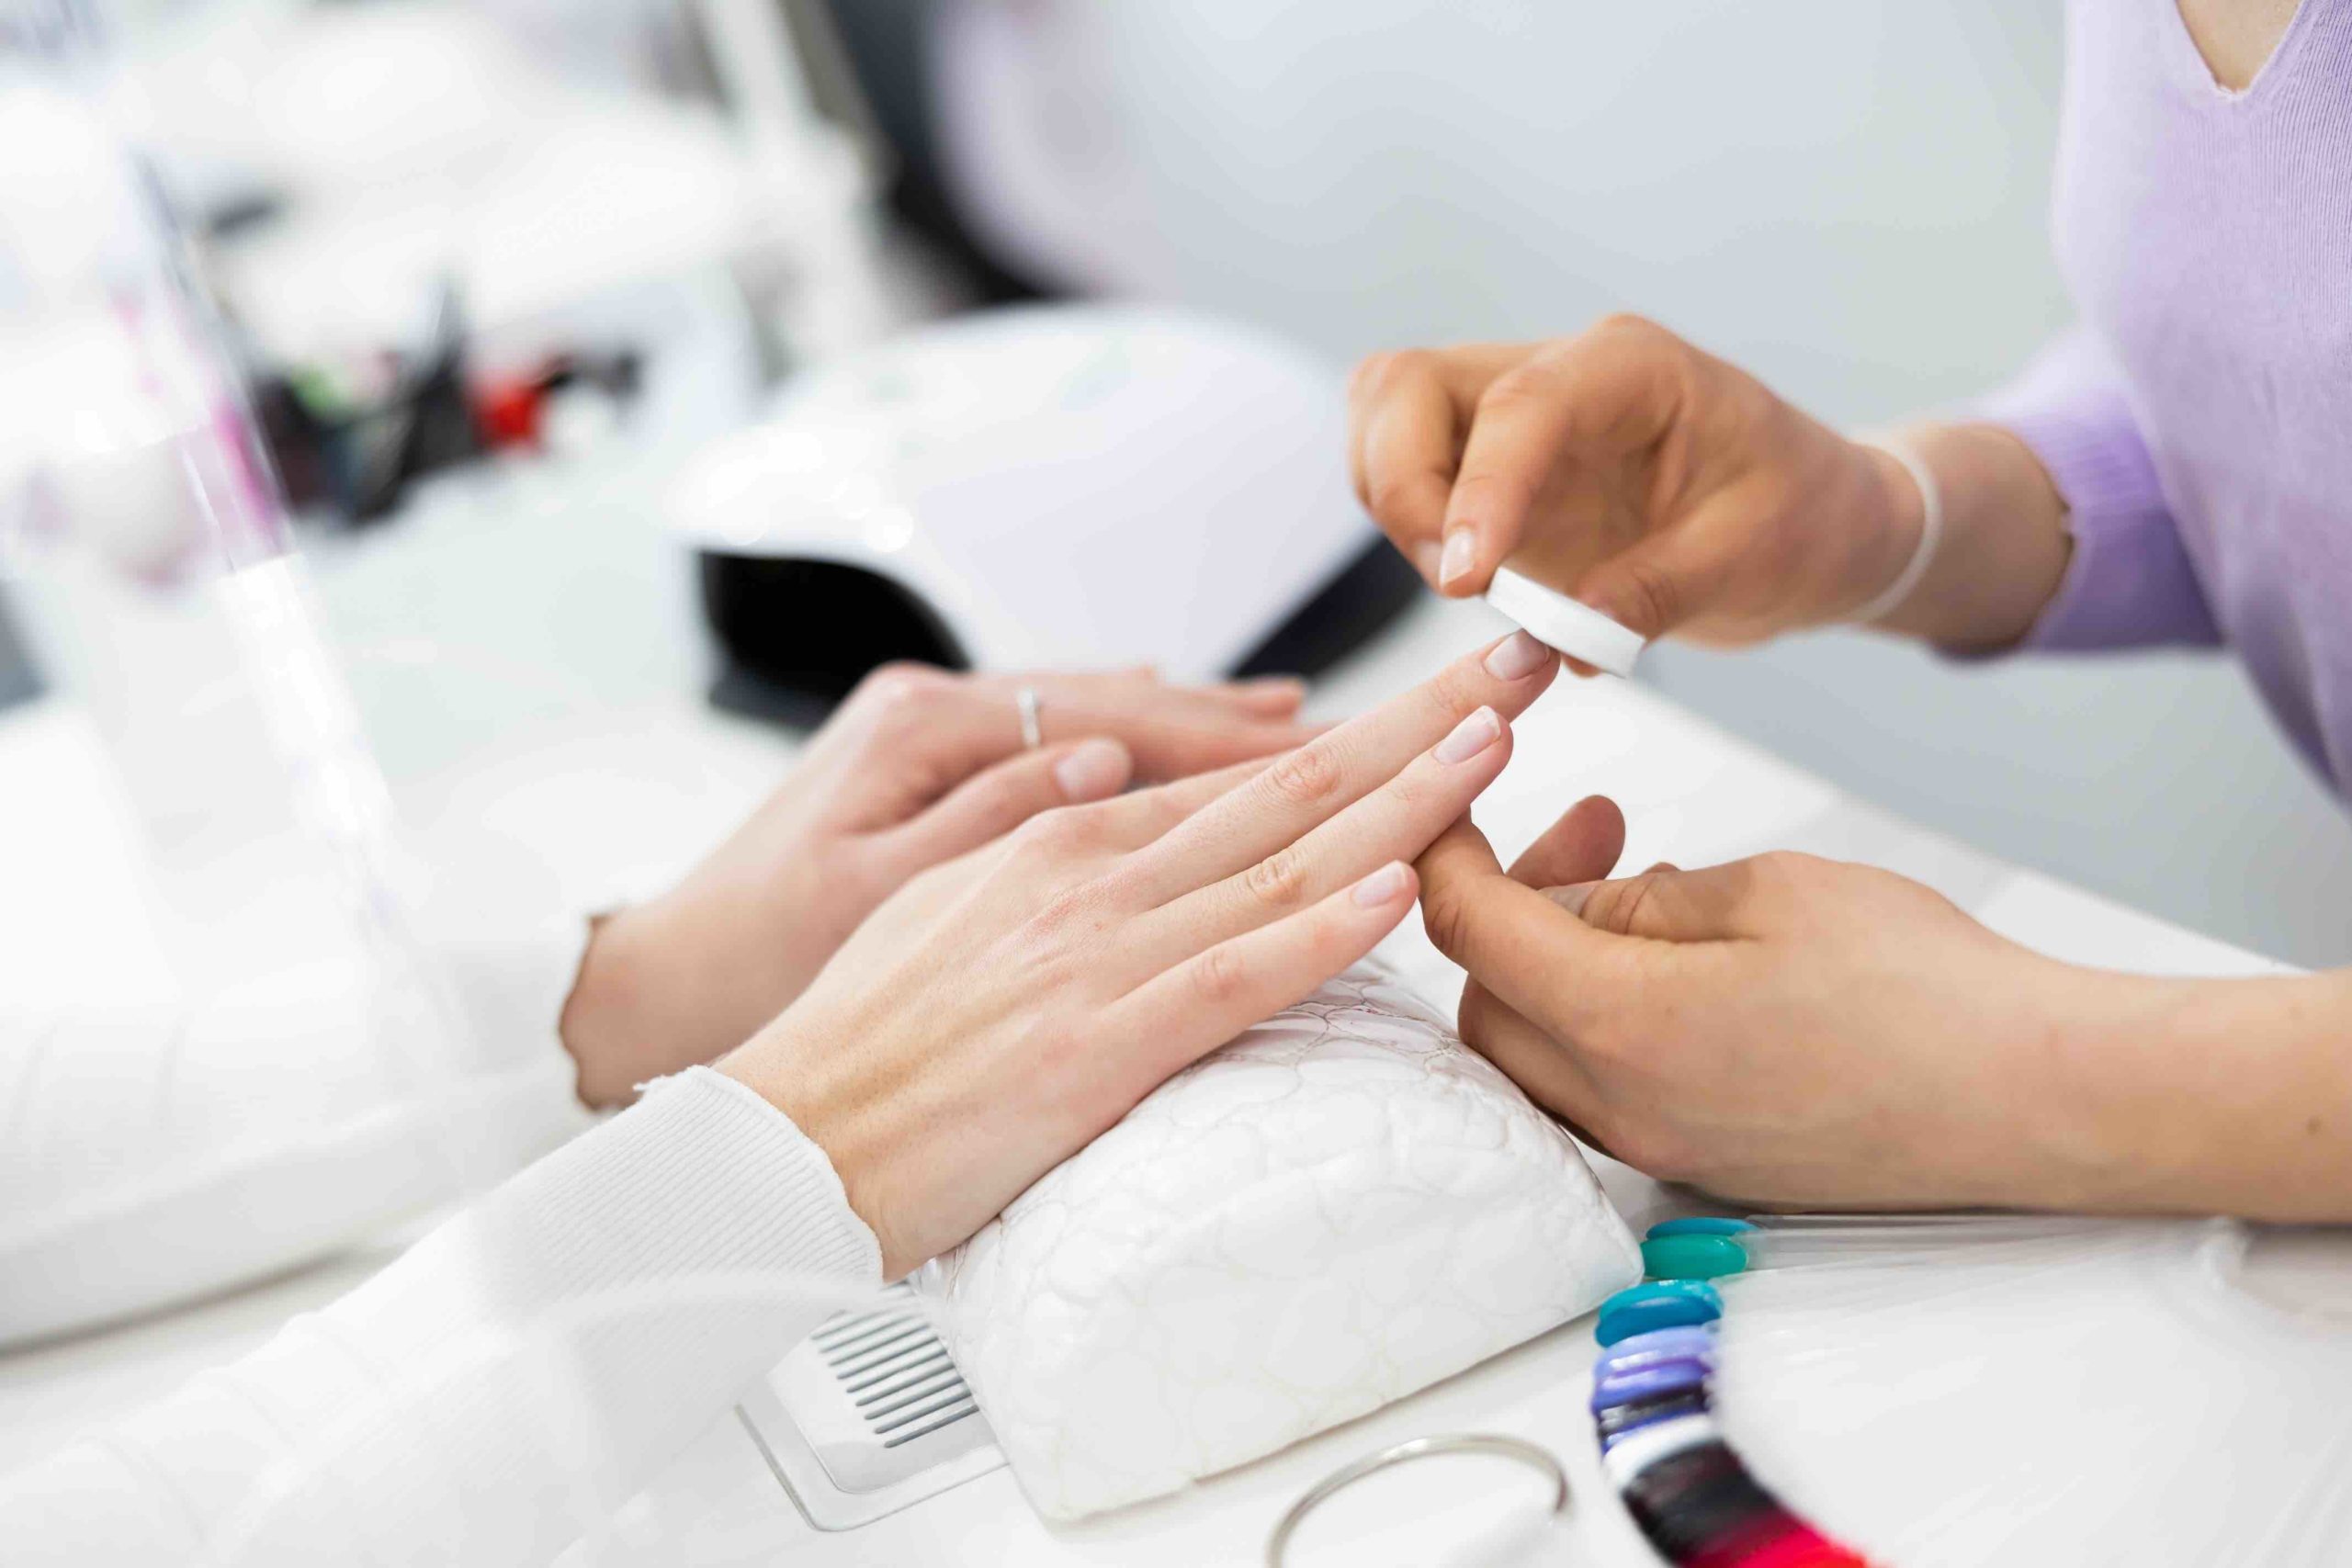 Everything You Need to Know Before Getting a Russian Manicure